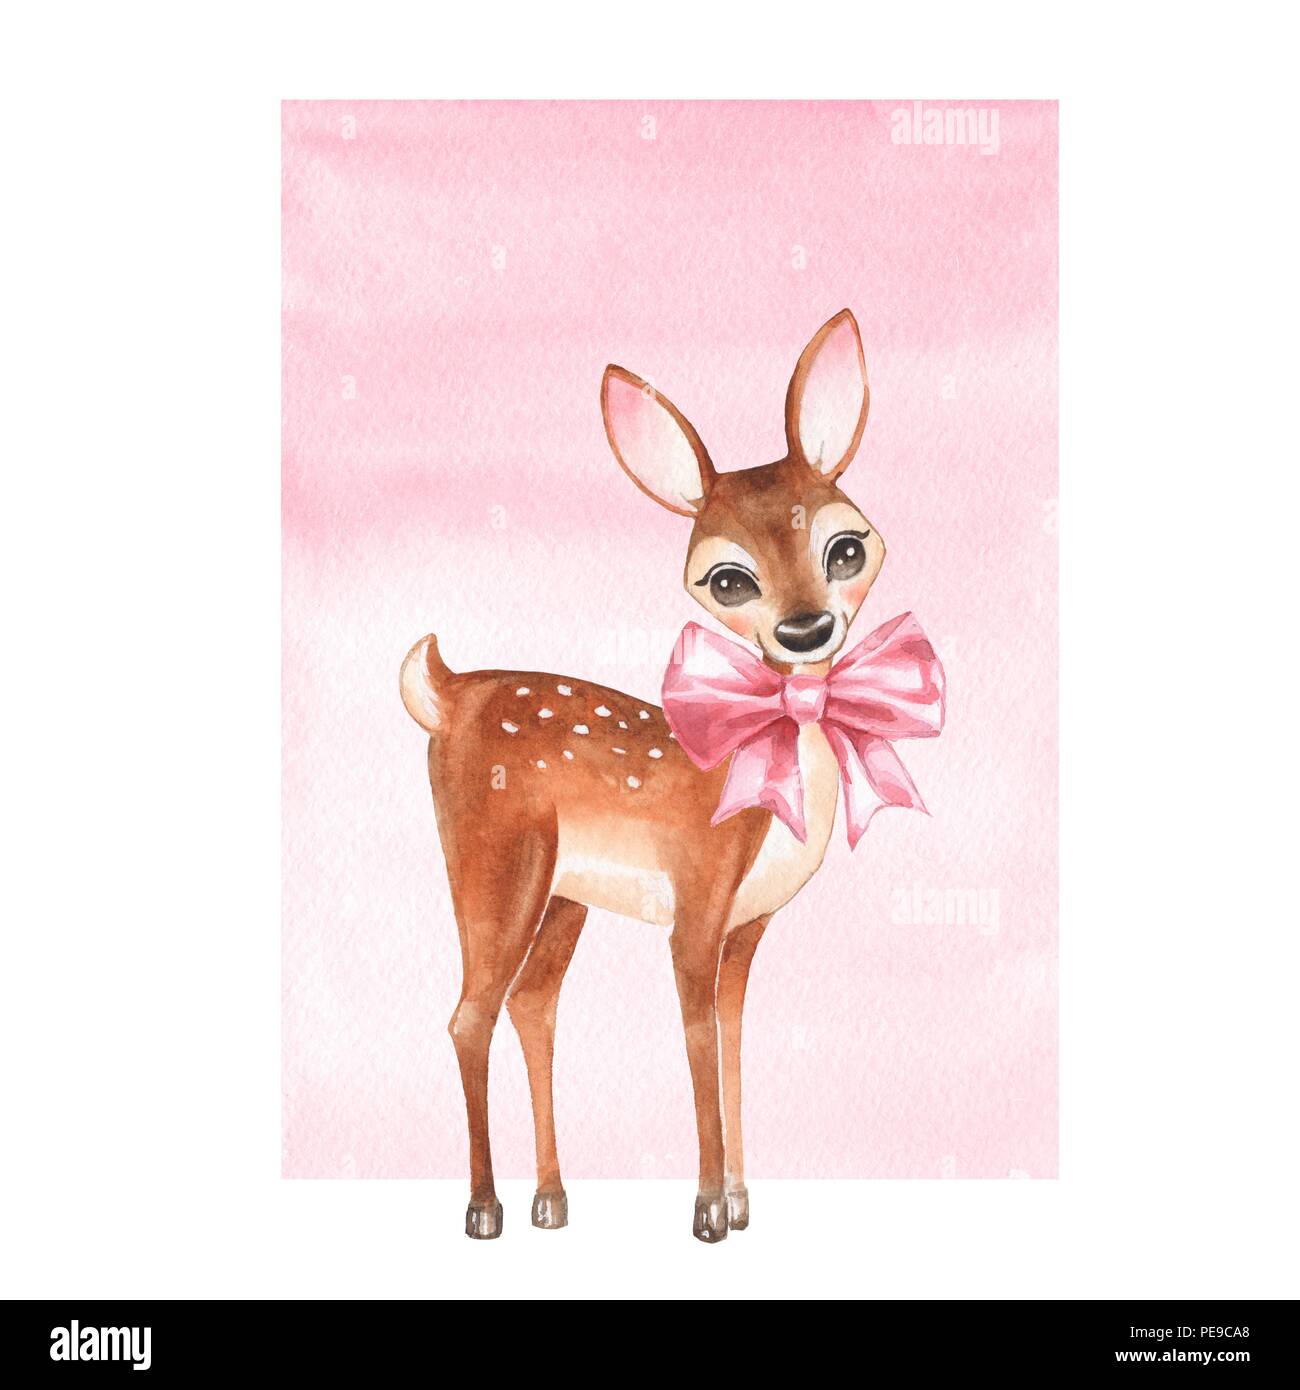 Baby Deer. Hand drawn cute fawn with a bow. Cartoon illustration Stock Photo